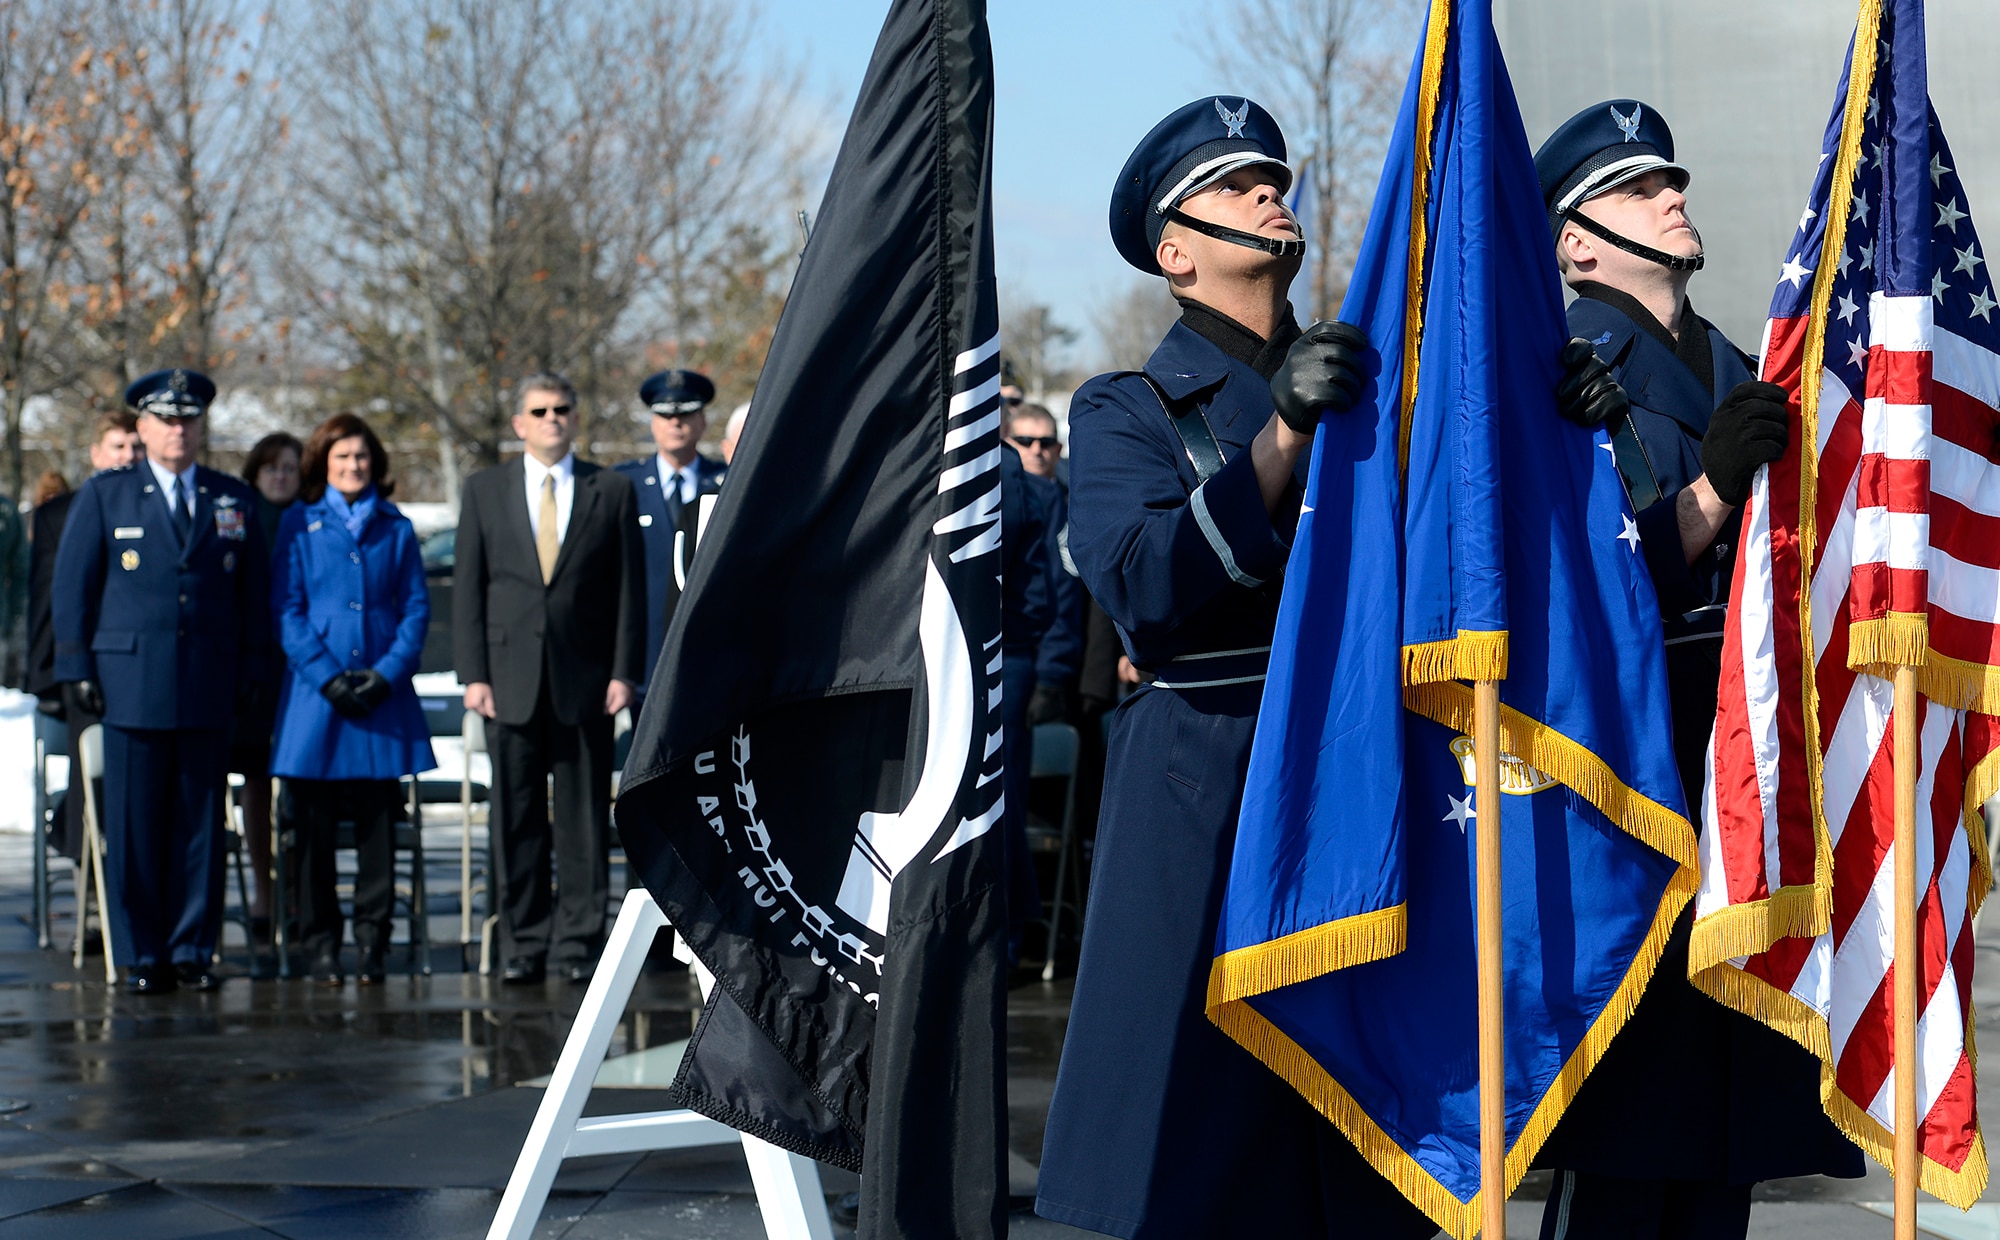 The U.S. Air Force Honor Guard posts the colors during a wreath laying ceremony March 2, 2015, hosted by Air Force Chief of Staff Gen. Mark A. Welsh III, honoring Air Force Vietnam prisoners of war and missing in action at the Air Force Memorial in Arlington, Va., March 2, 2015. (U.S. Air Force photo/Scott M. Ash)